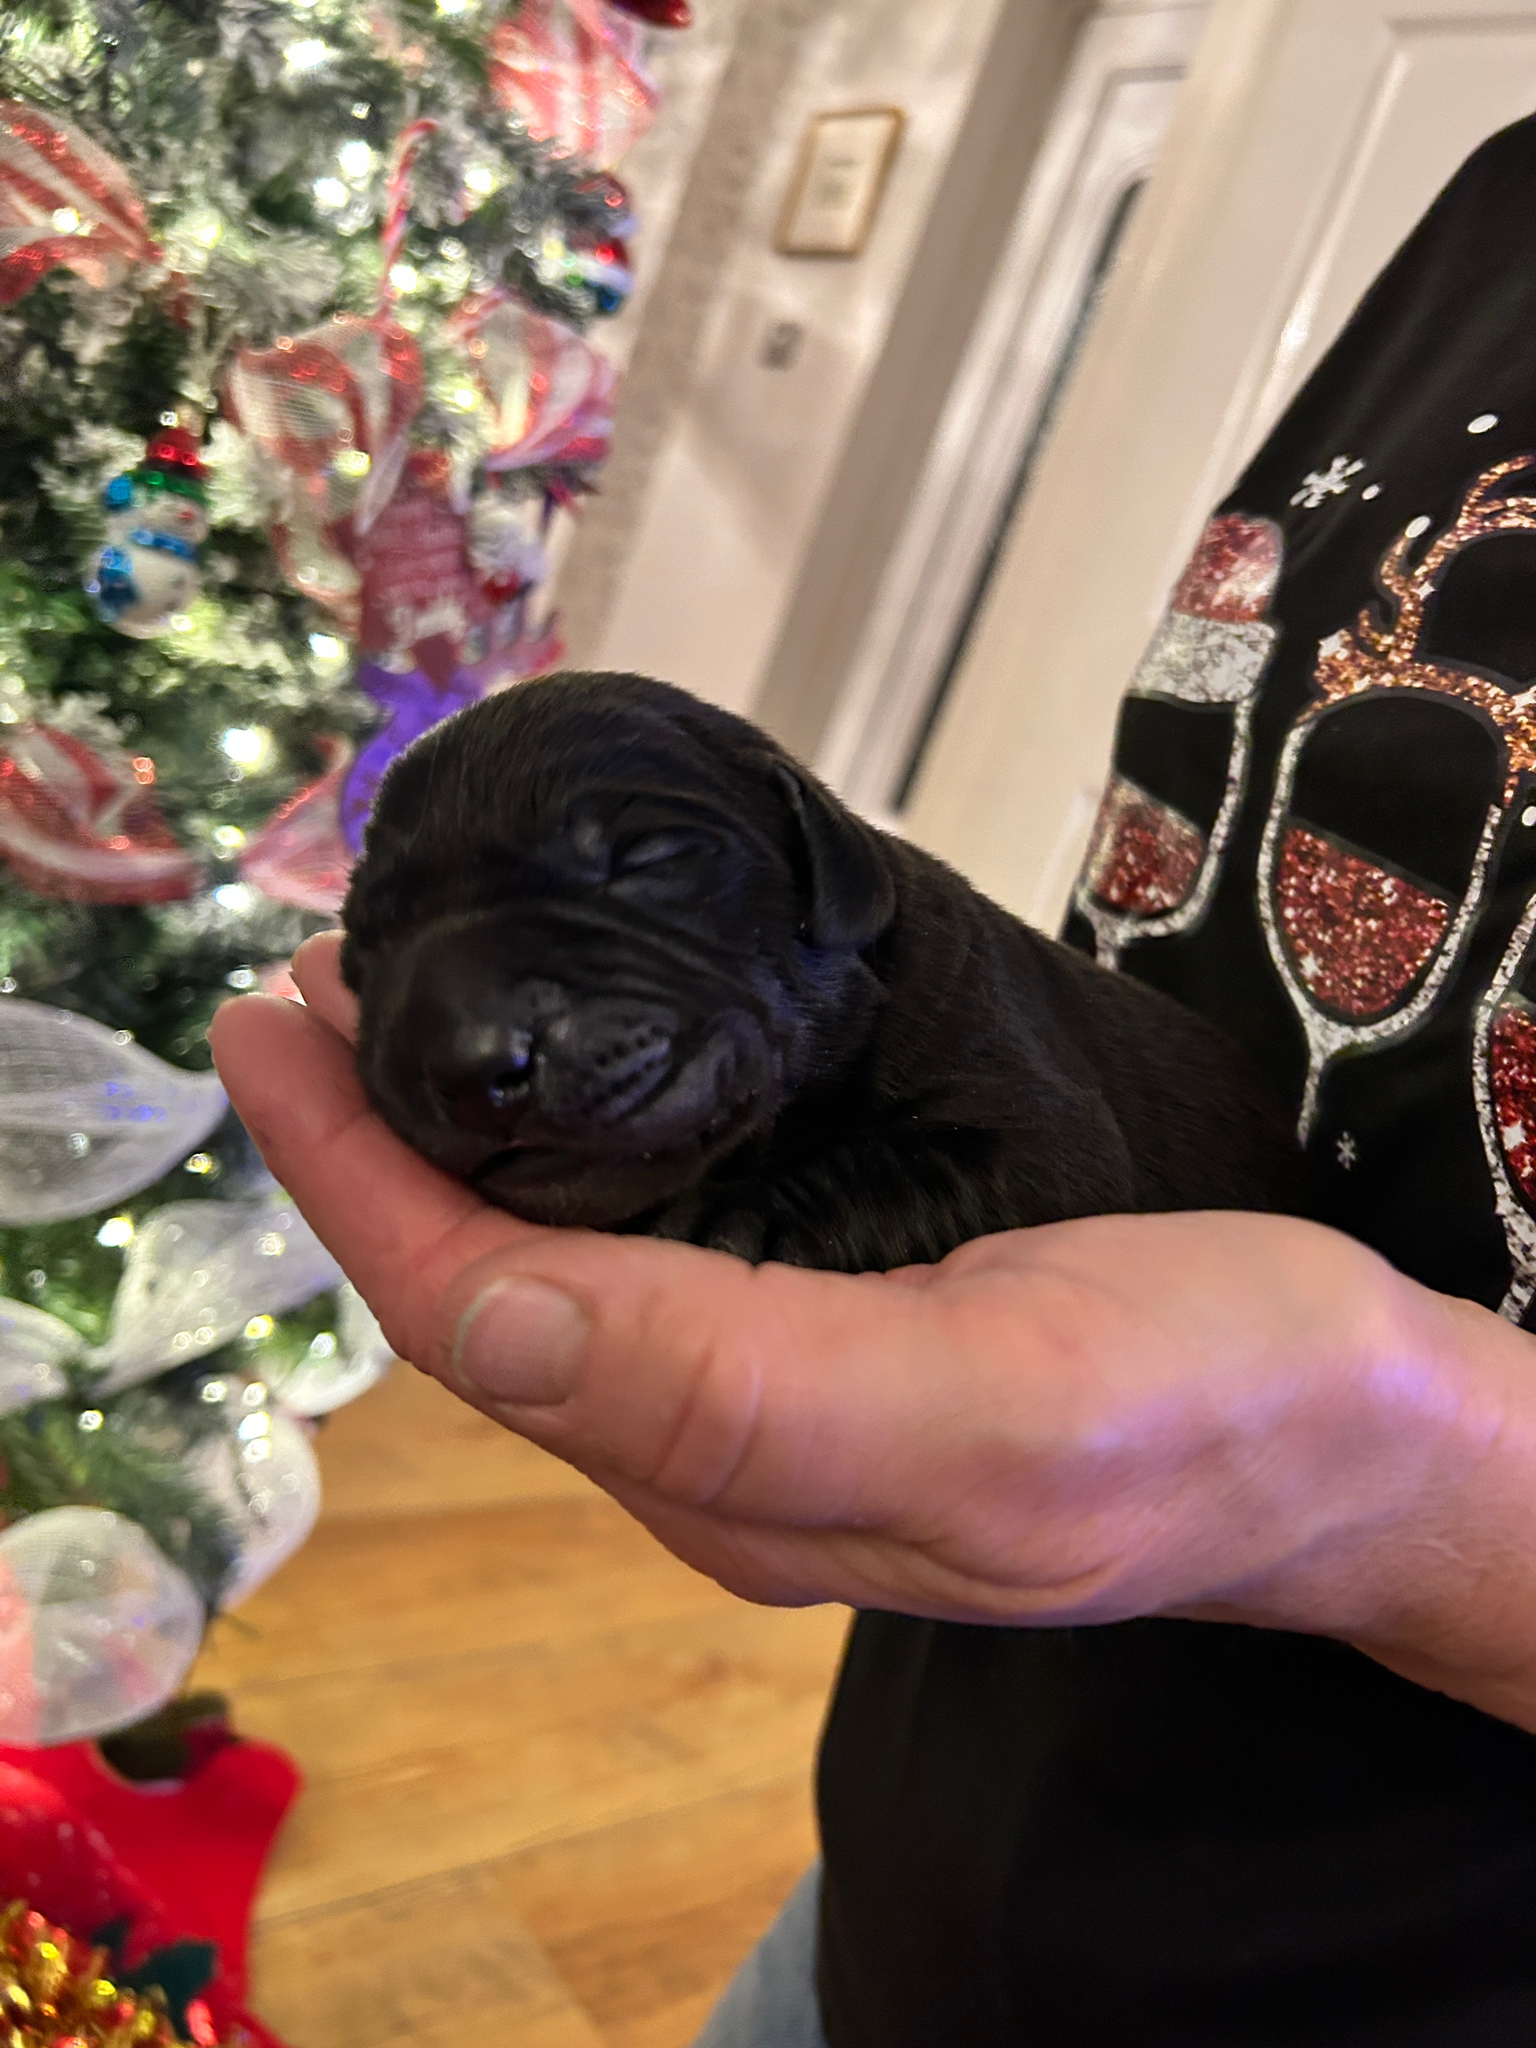 A newborn black labrador guide dog puppy, who was born on Christmas Day, is held by a volunteer. The puppy fits in the palm of her hand. In the background there is a Christmas tree and the volunteer wears a sparkly Christmas jumper.